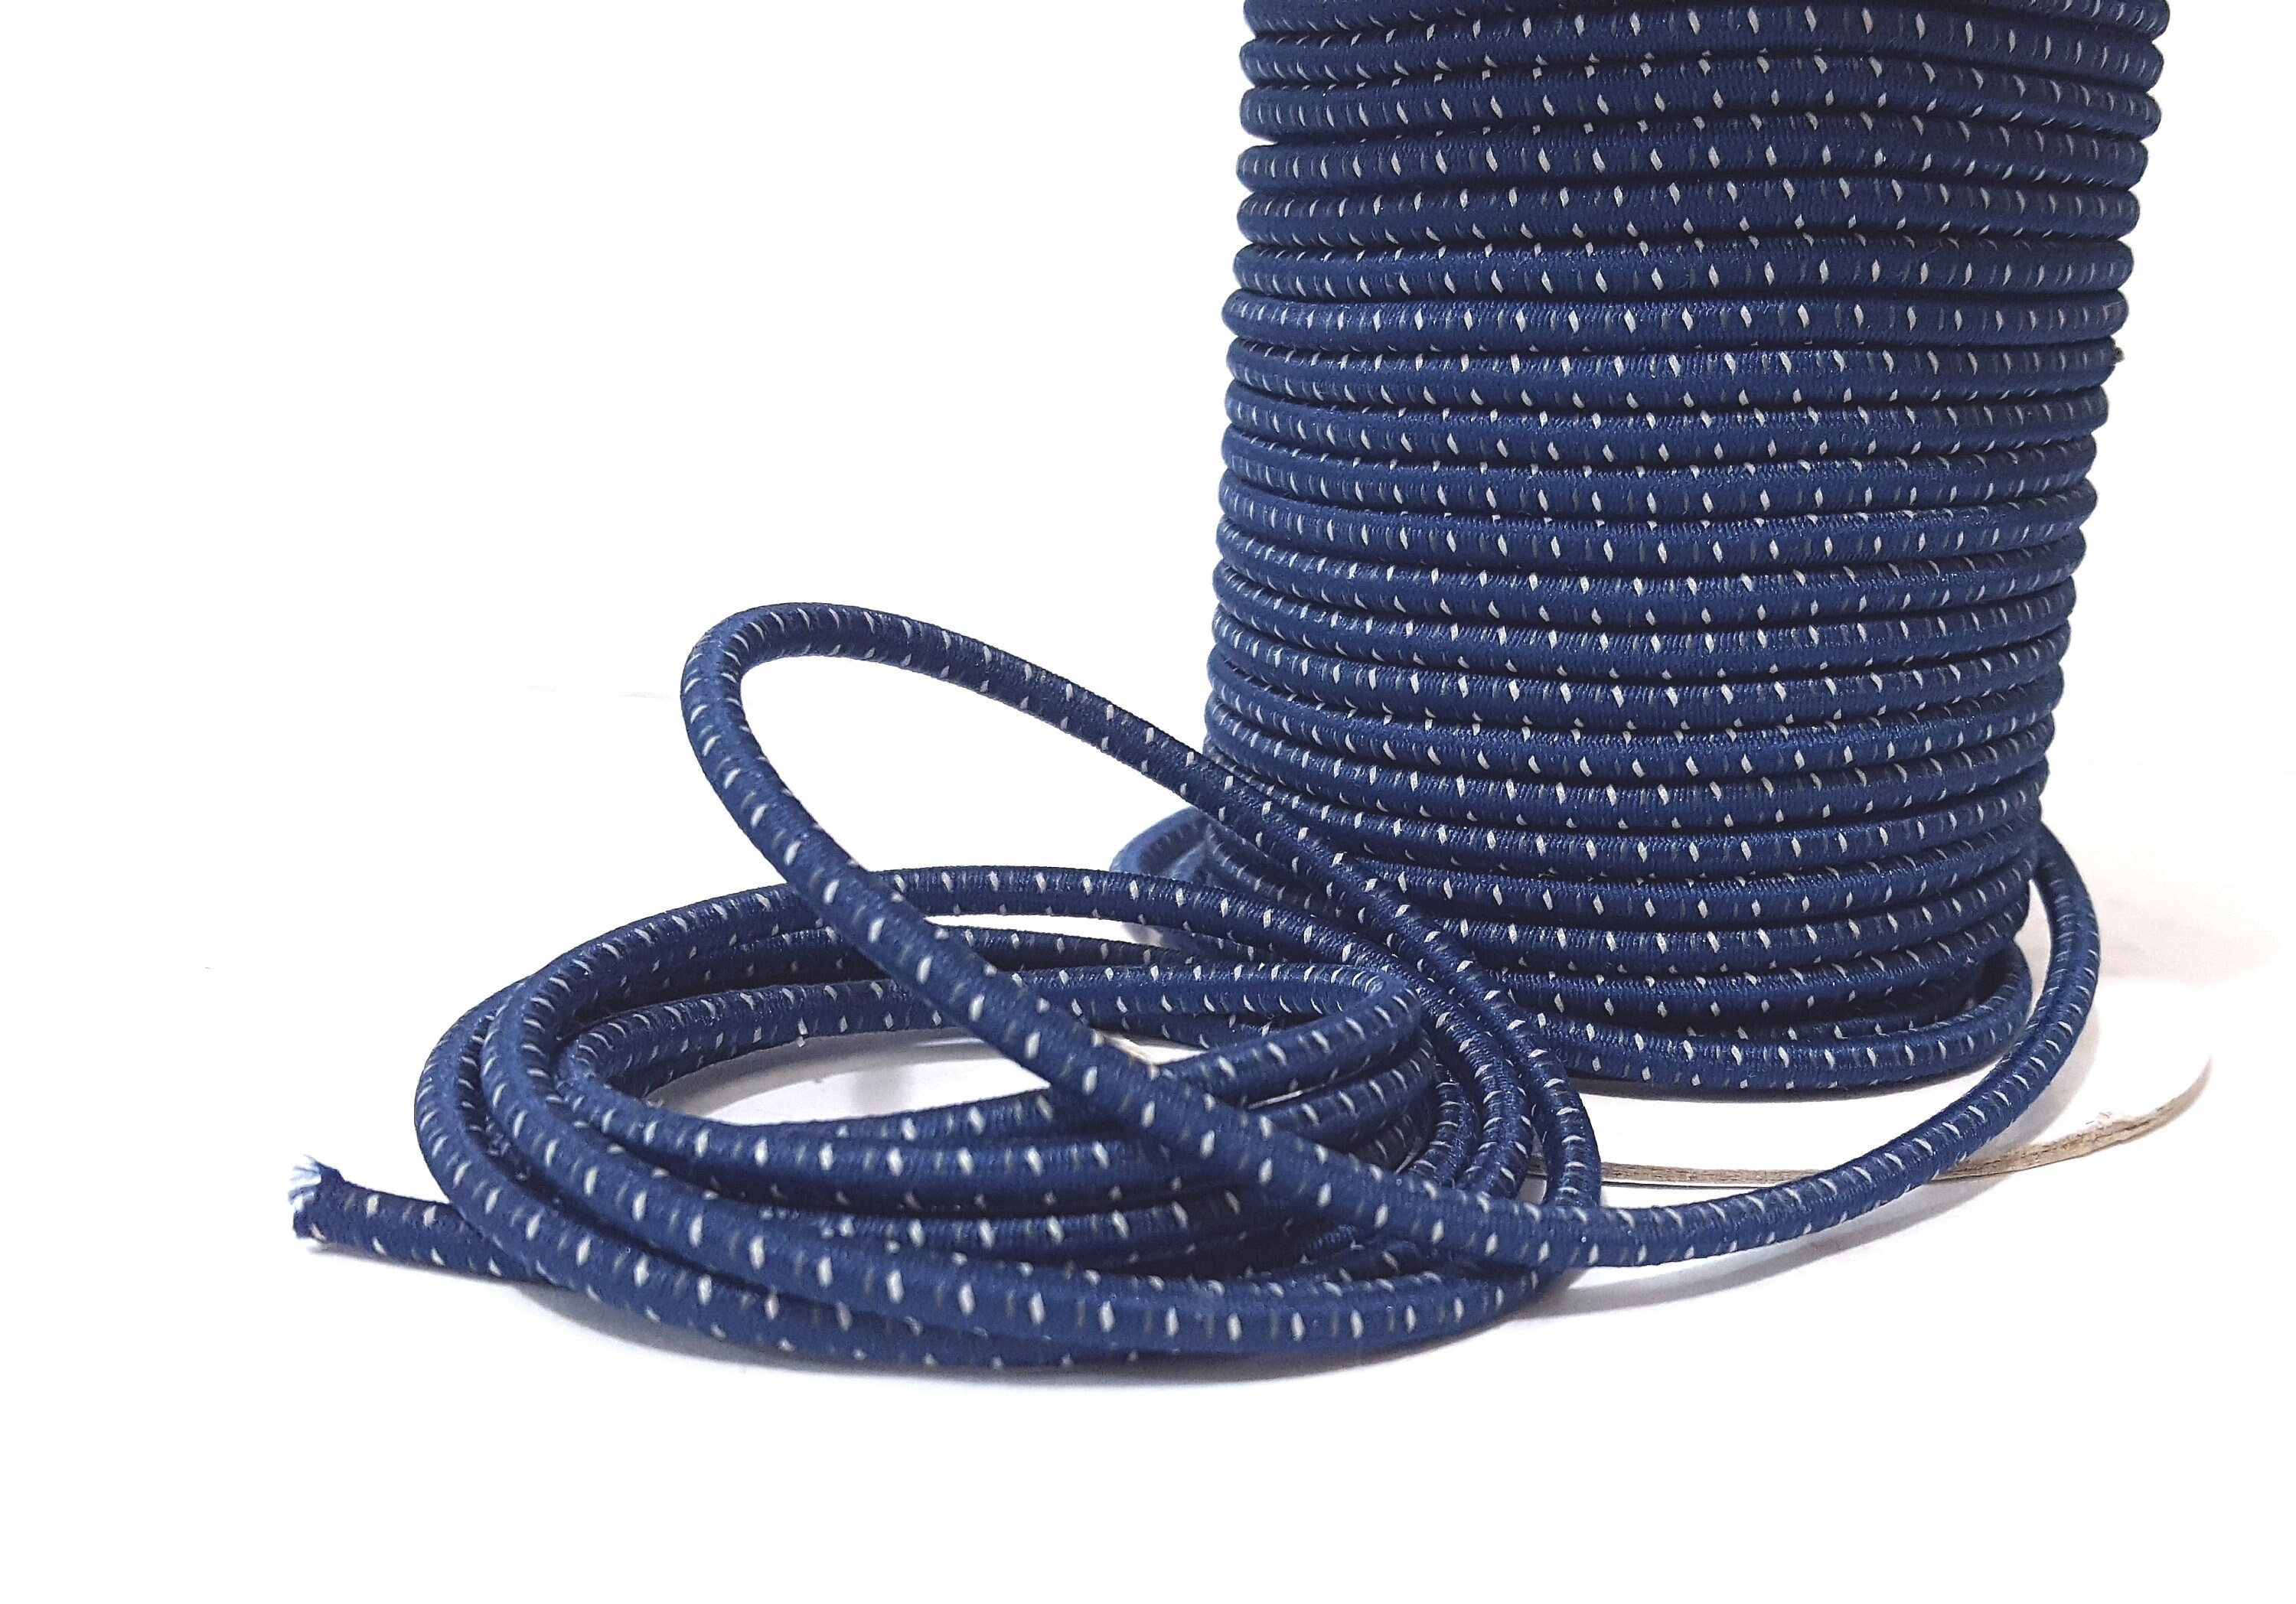 NYLON Braided Cord rope,2mm,3mm,4mm,5mm,6mm. Soft, Strong, U choose size  &length